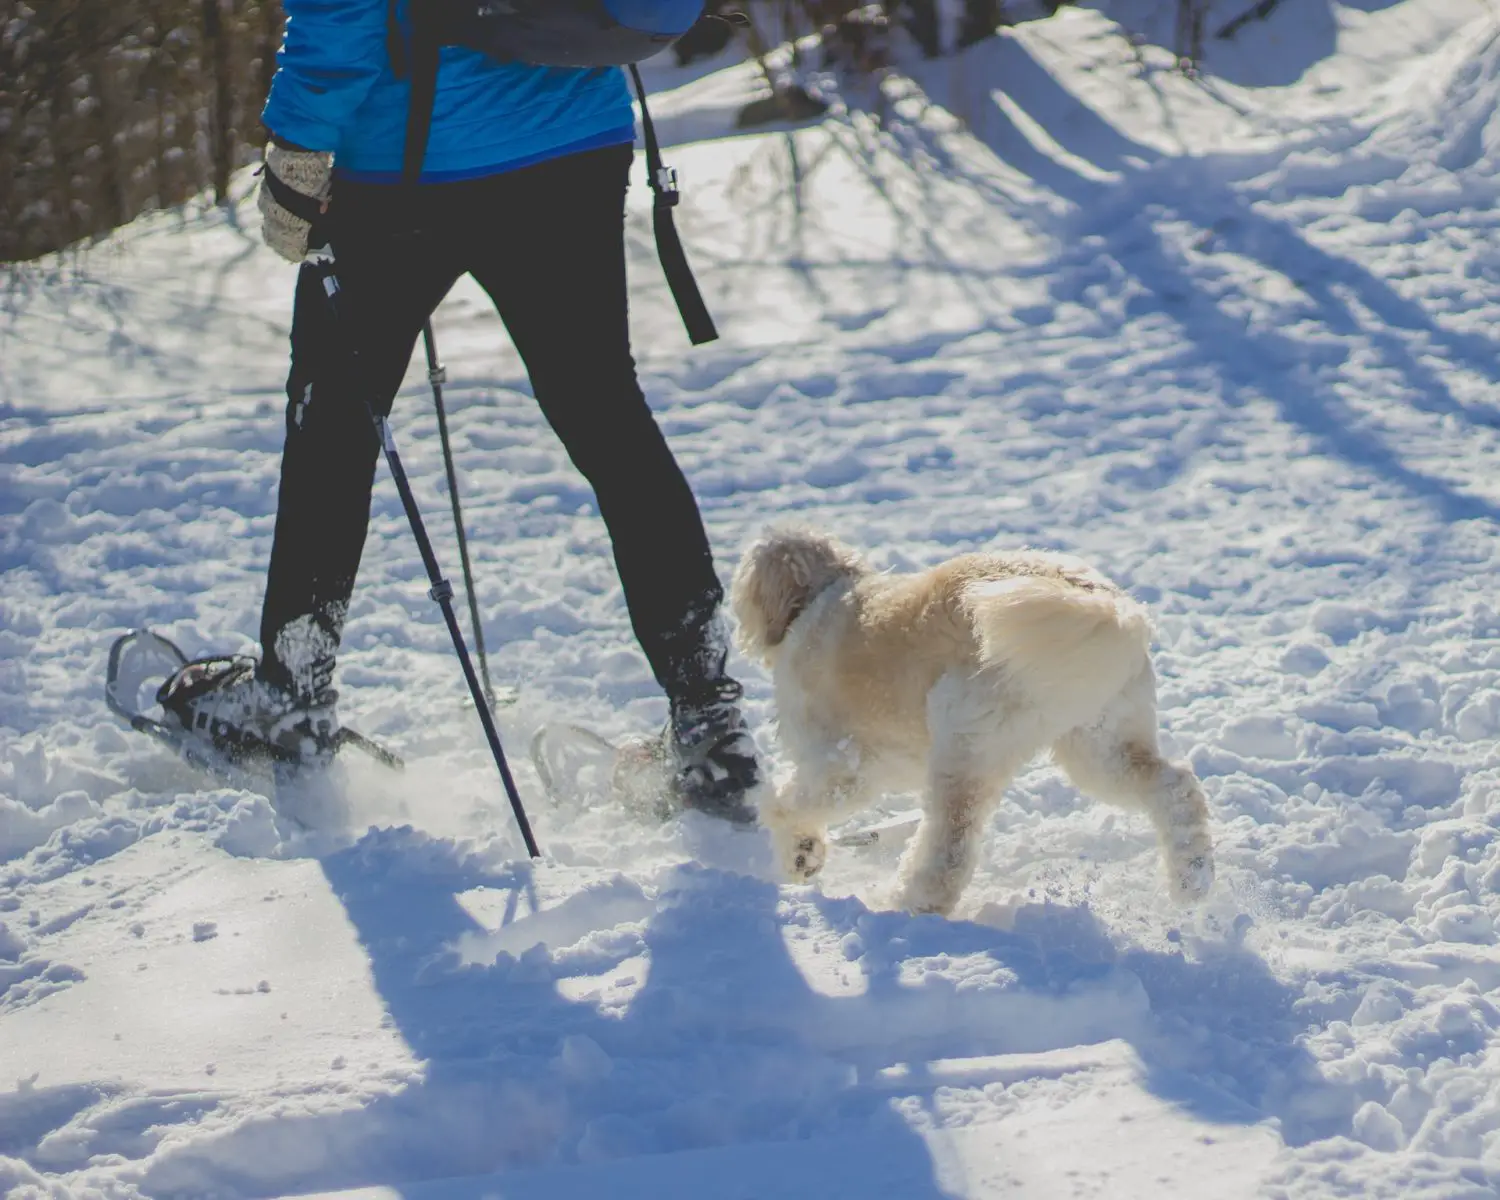 Snowshoeing with a dog - Photo: Bonnie Kittle